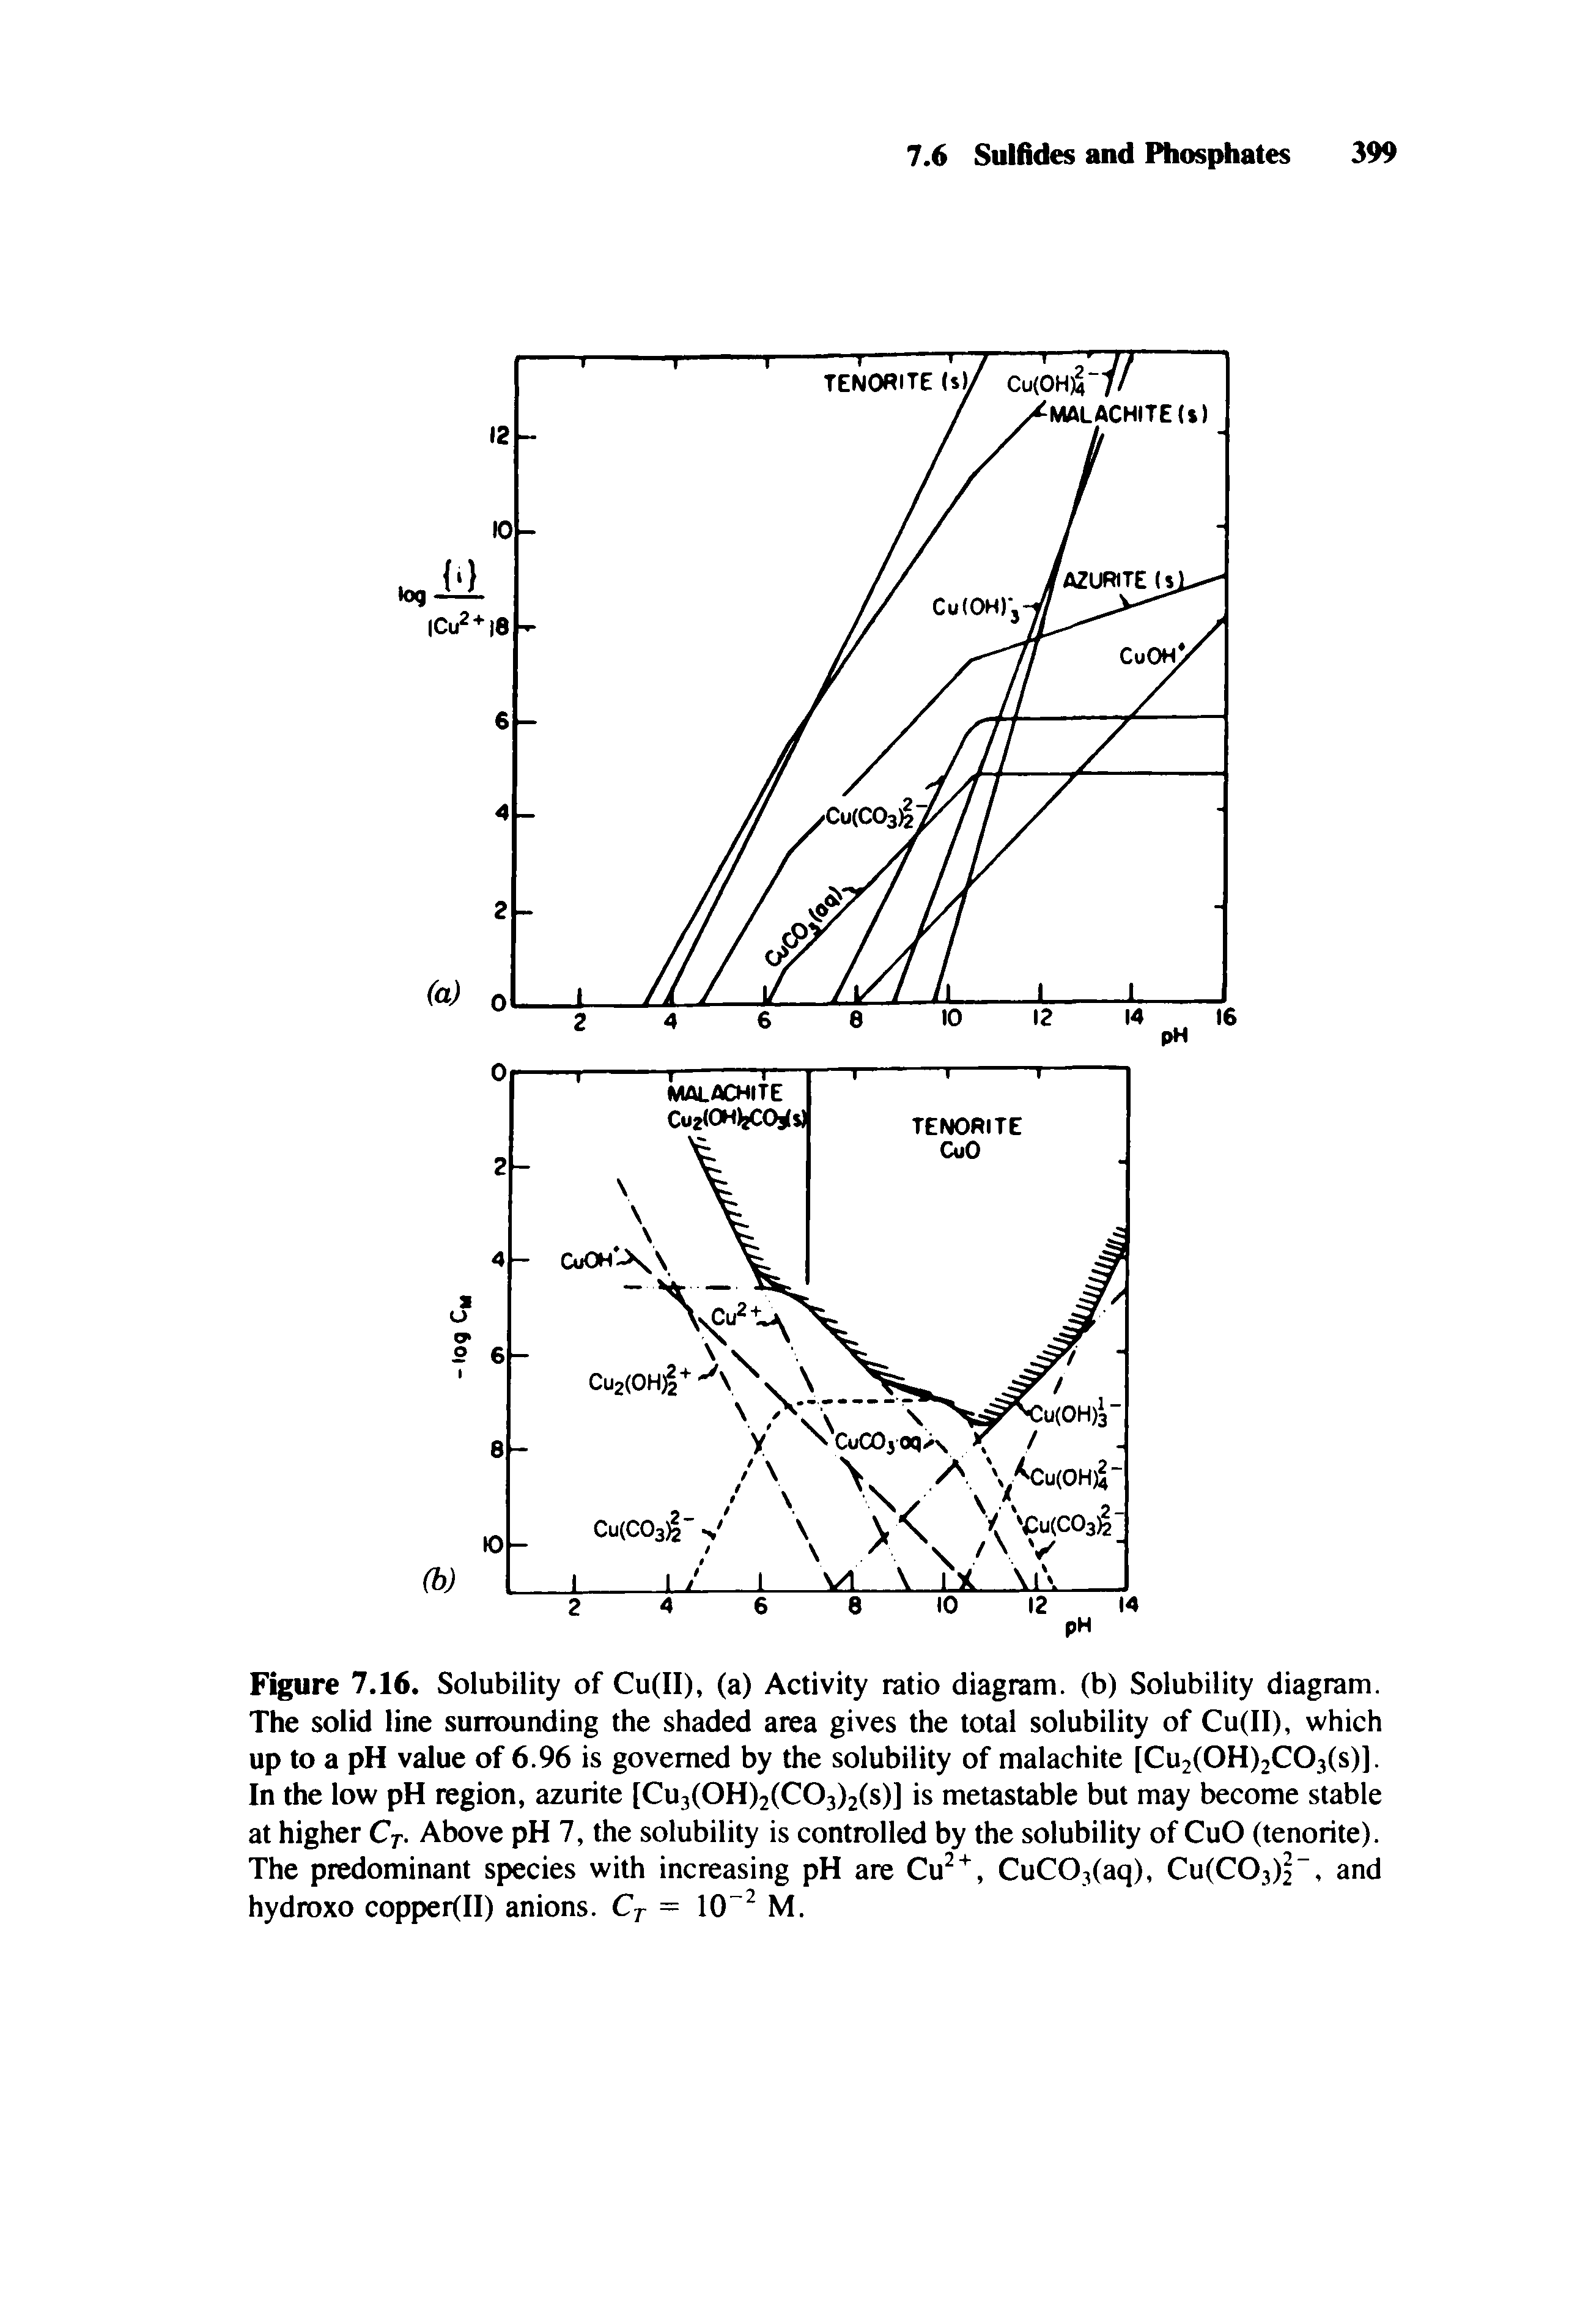 Figure 7.16. Solubility of Cu(II), (a) Activity ratio diagram, (b) Solubility diagram. The solid line surrounding the shaded area gives the total solubility of Cu(II), which up to a pH value of 6.96 is governed by the solubility of malachite [Cu2(0H)2C03(s)]. In the low pH region, azurite [Cu3(OH)2(C03)2(s)] is metastable but may become stable at higher C-j- Above pH 7, the solubility is controlled by the solubility of CuO (tenorite). The predominant species with increasing pH are CuC03(aq), Cu(C03)2 , and...